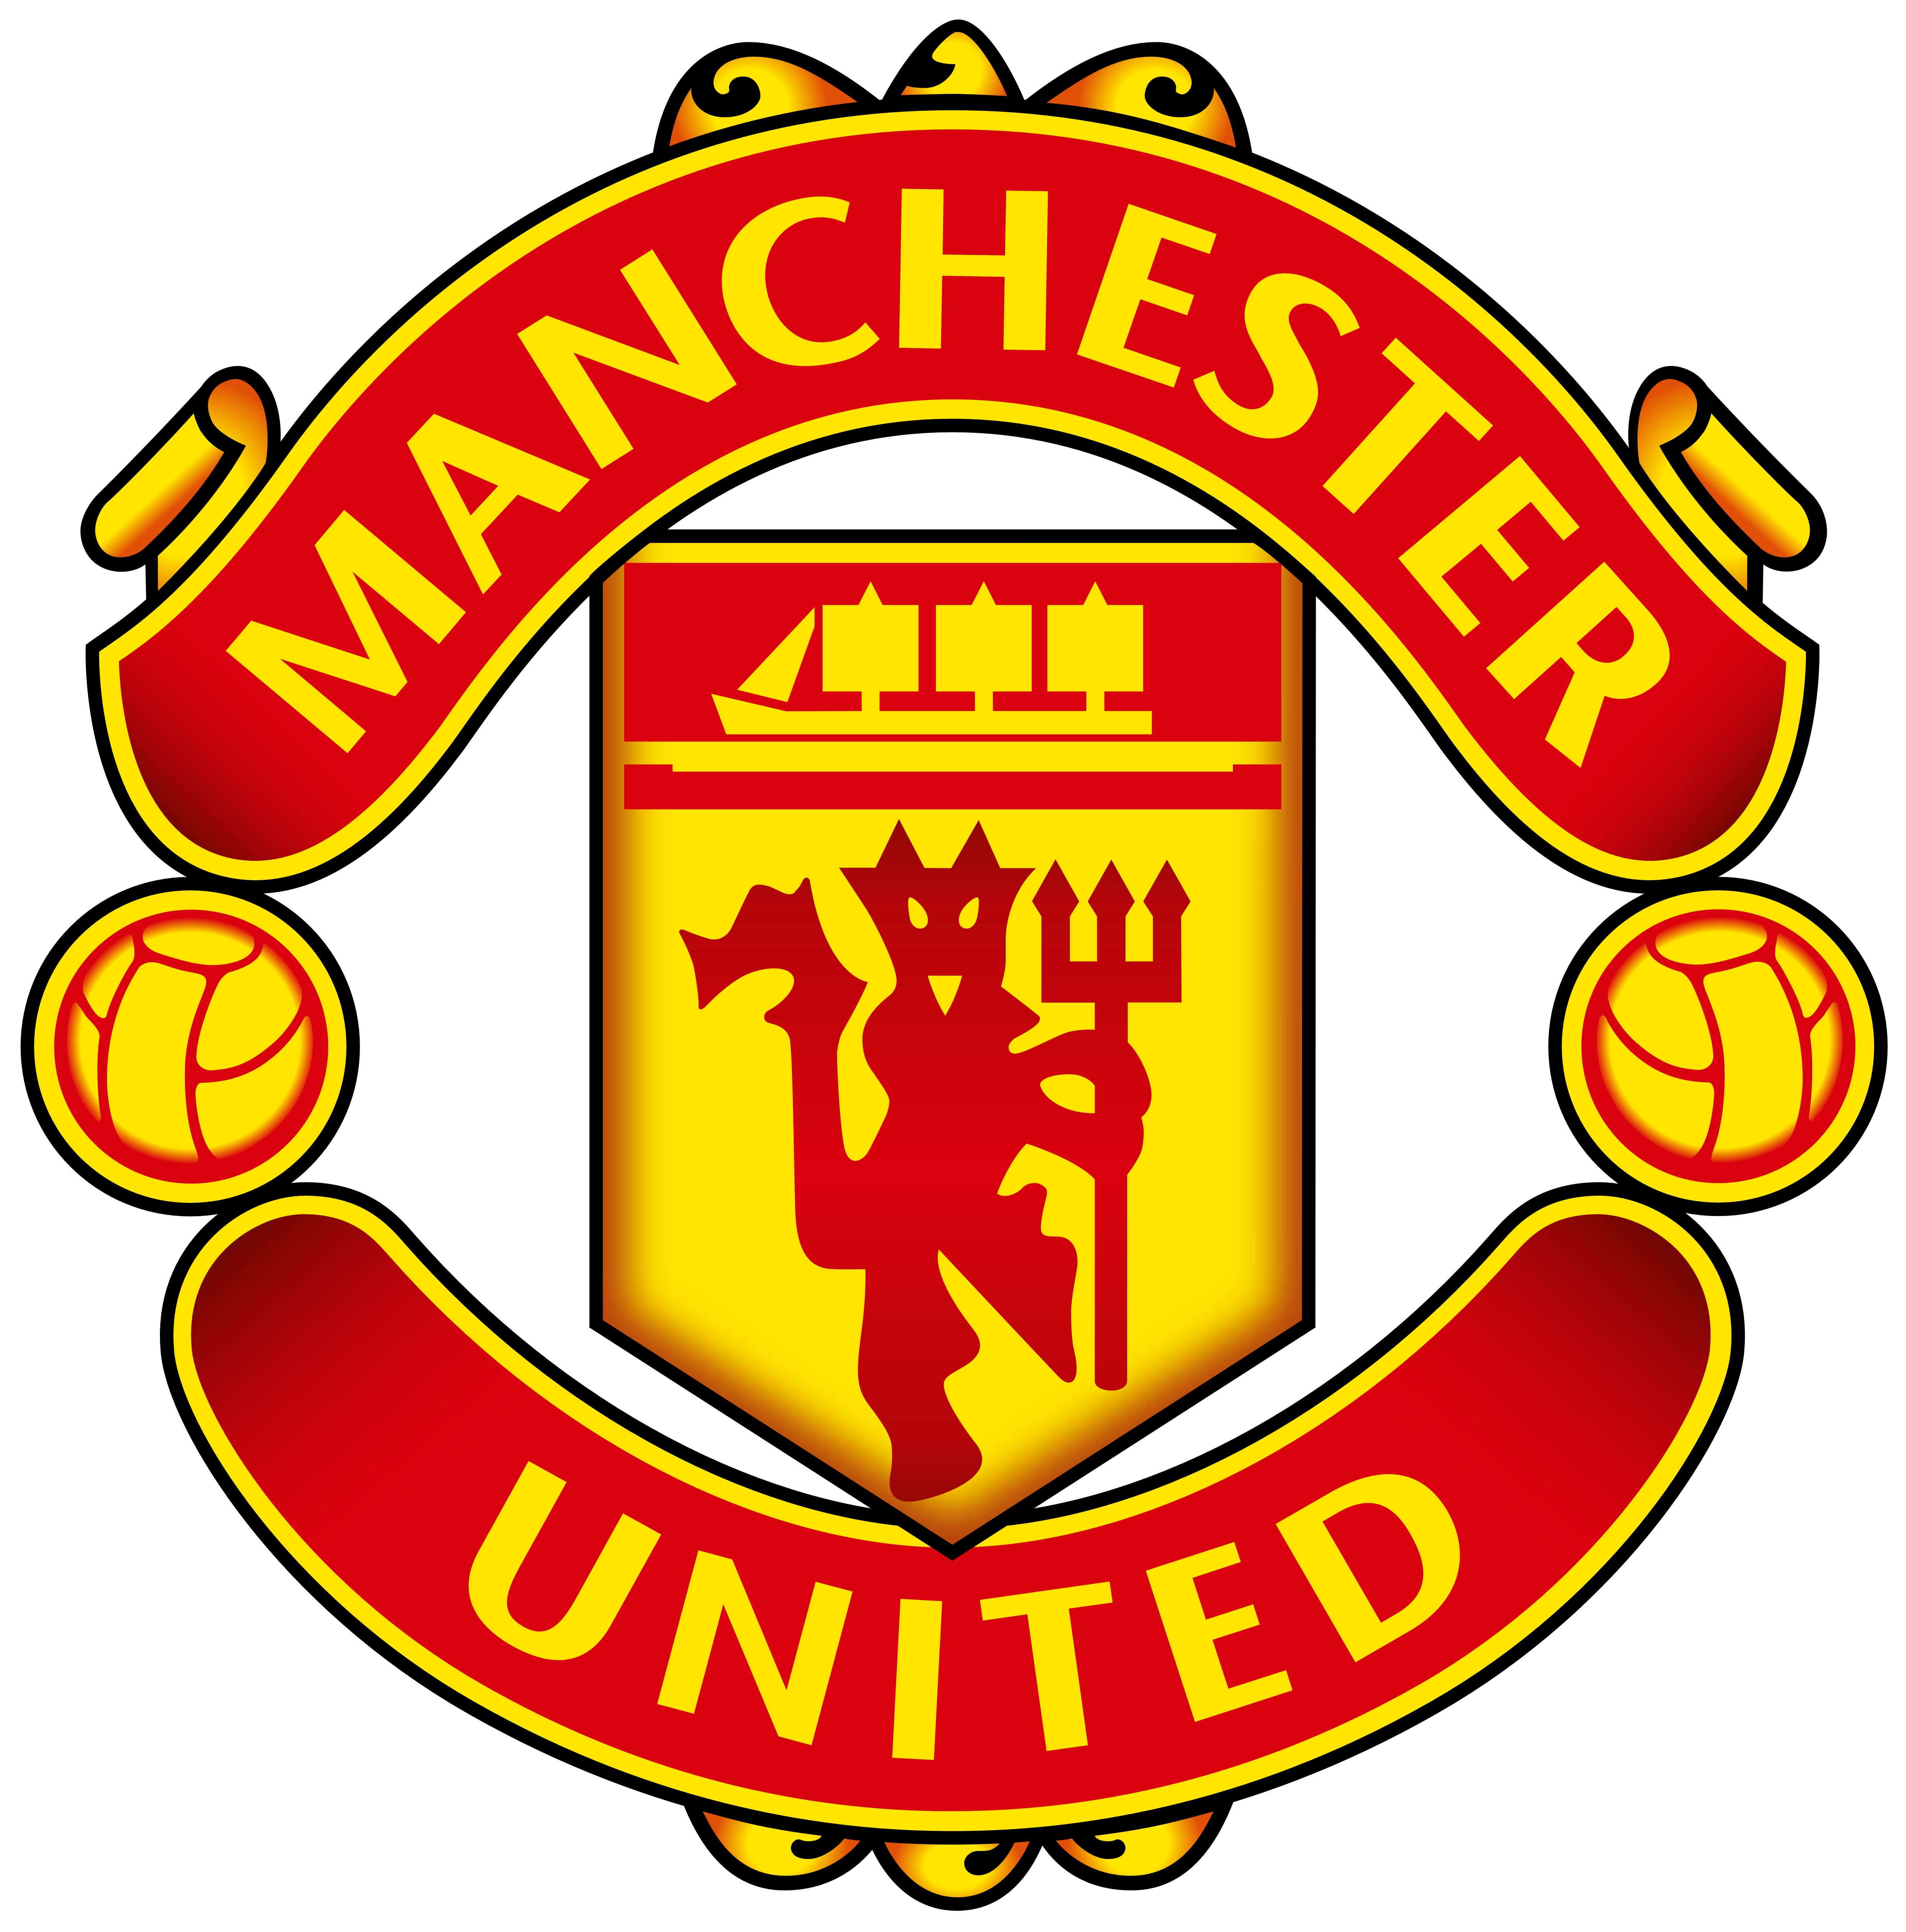 Manchester United - Logos Download